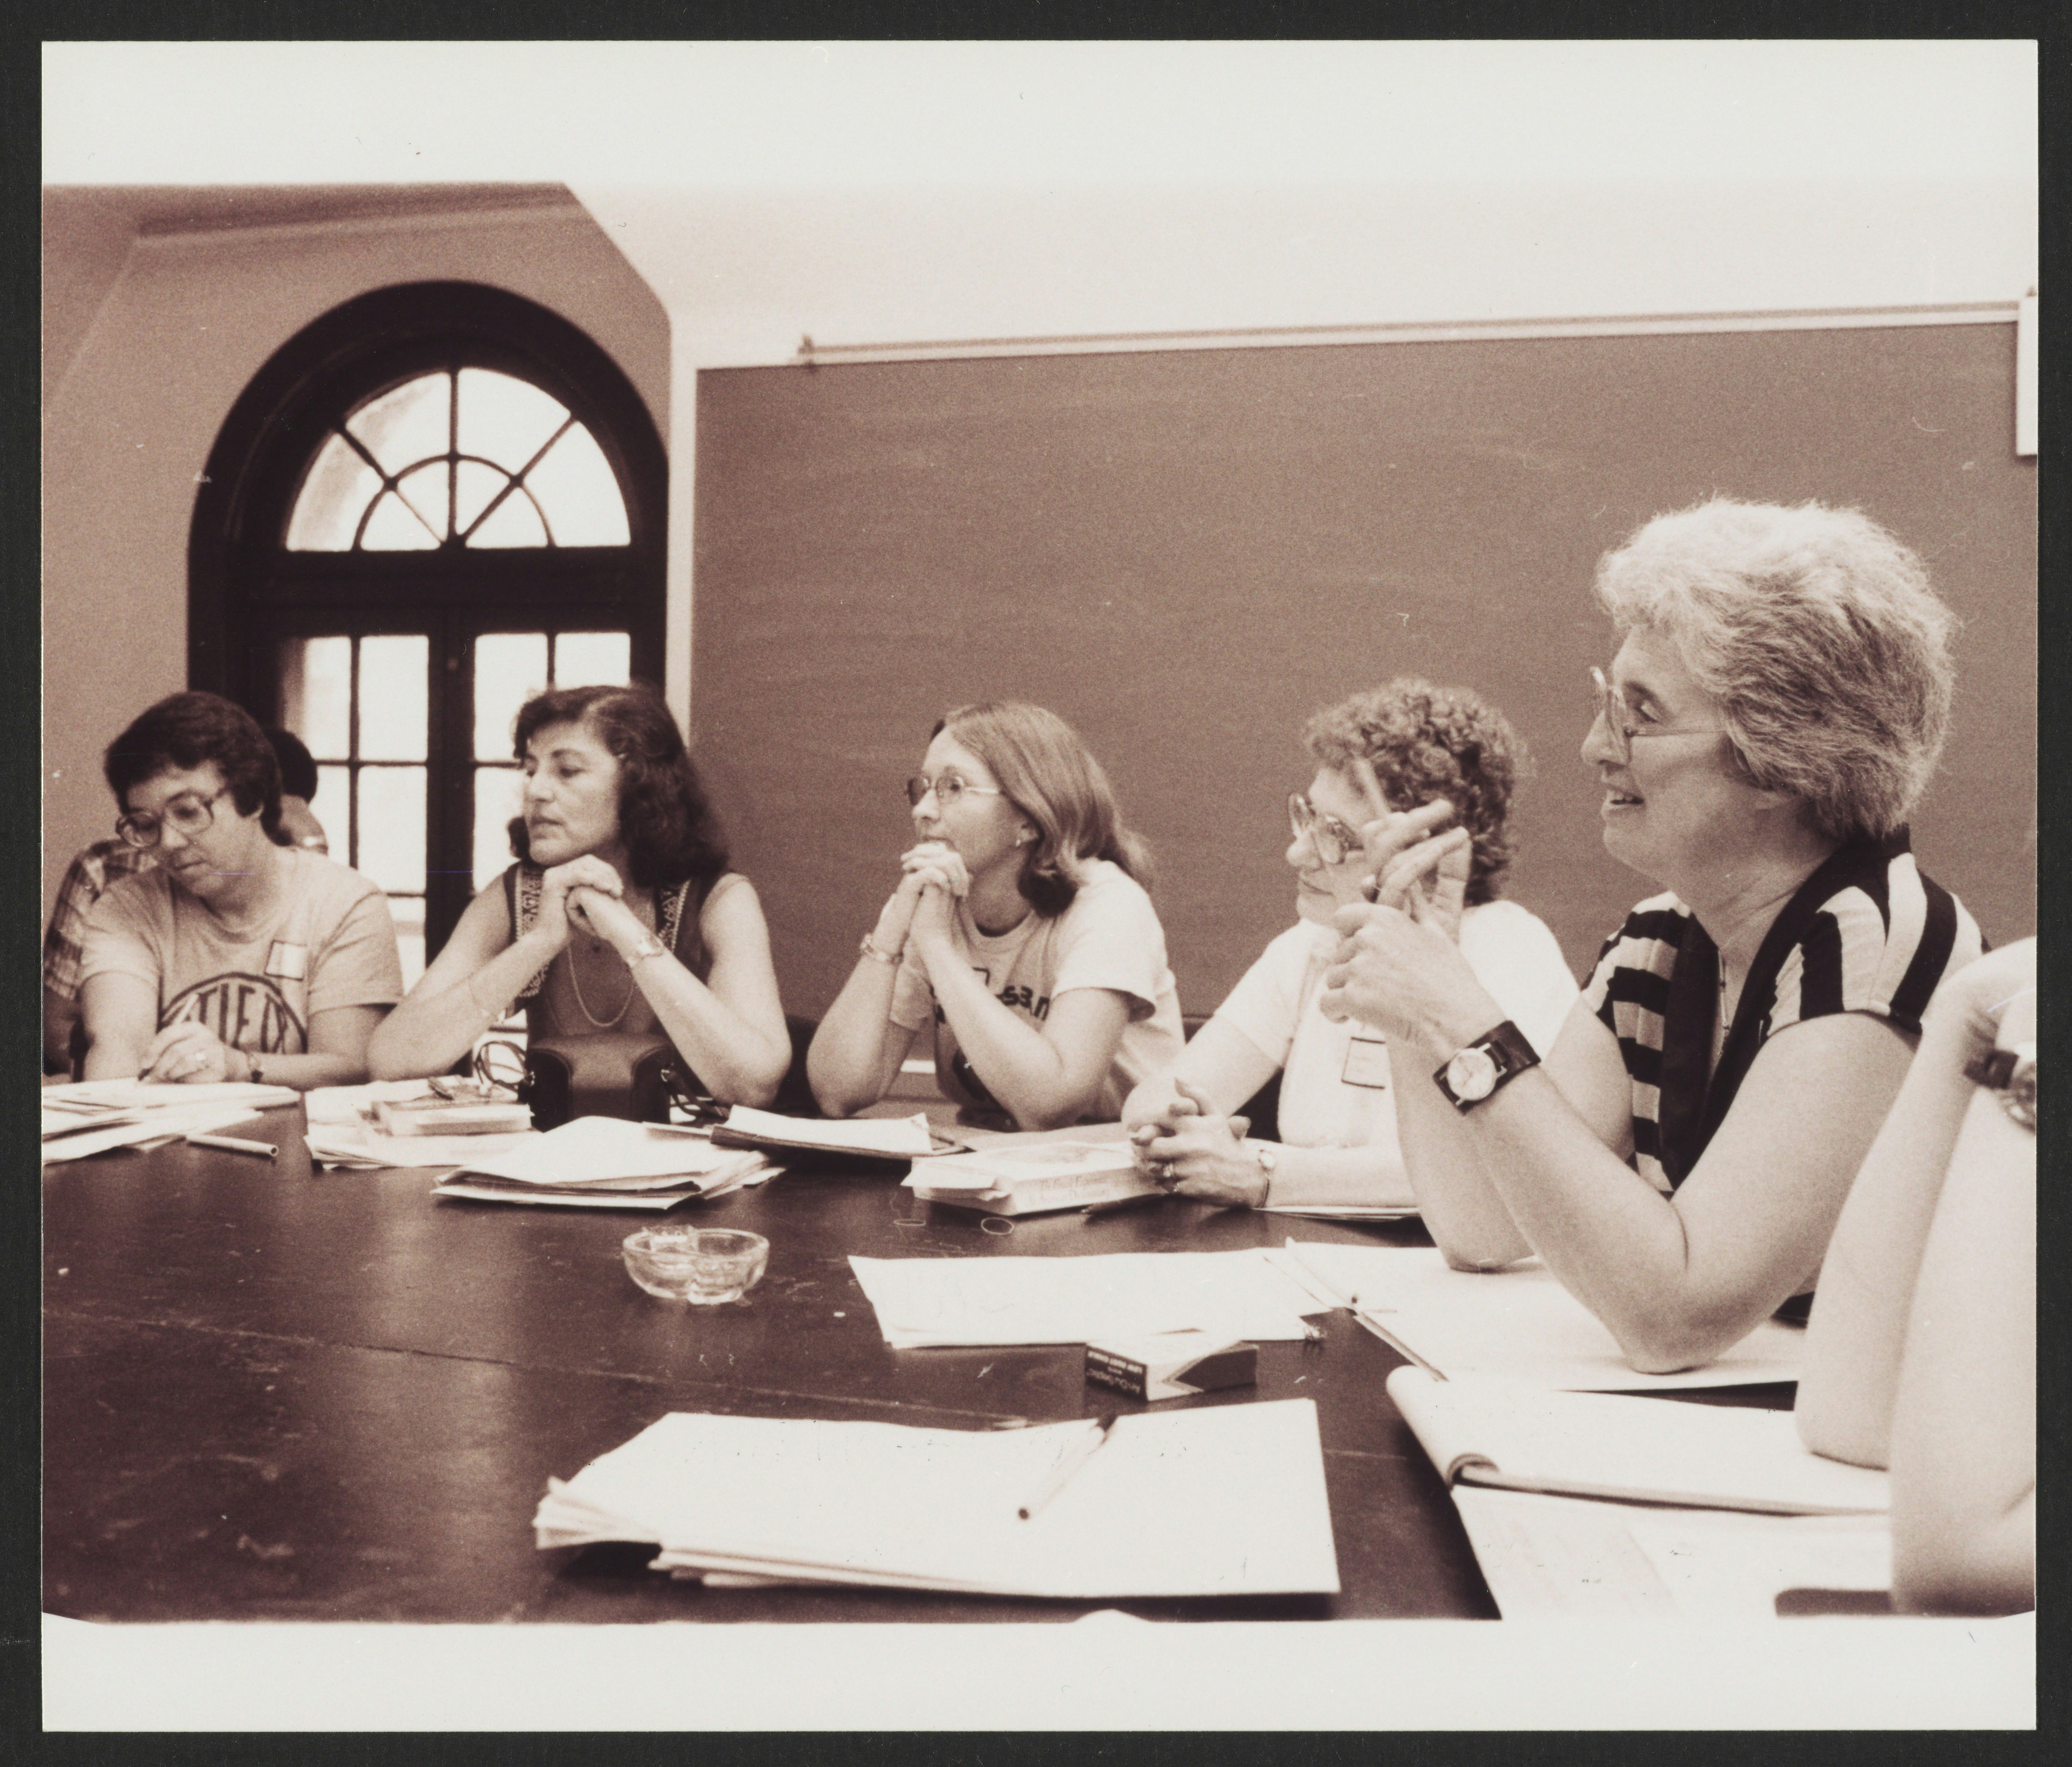 Gerda Lerner with 5 women seated at a classroom table, possibly at a conference